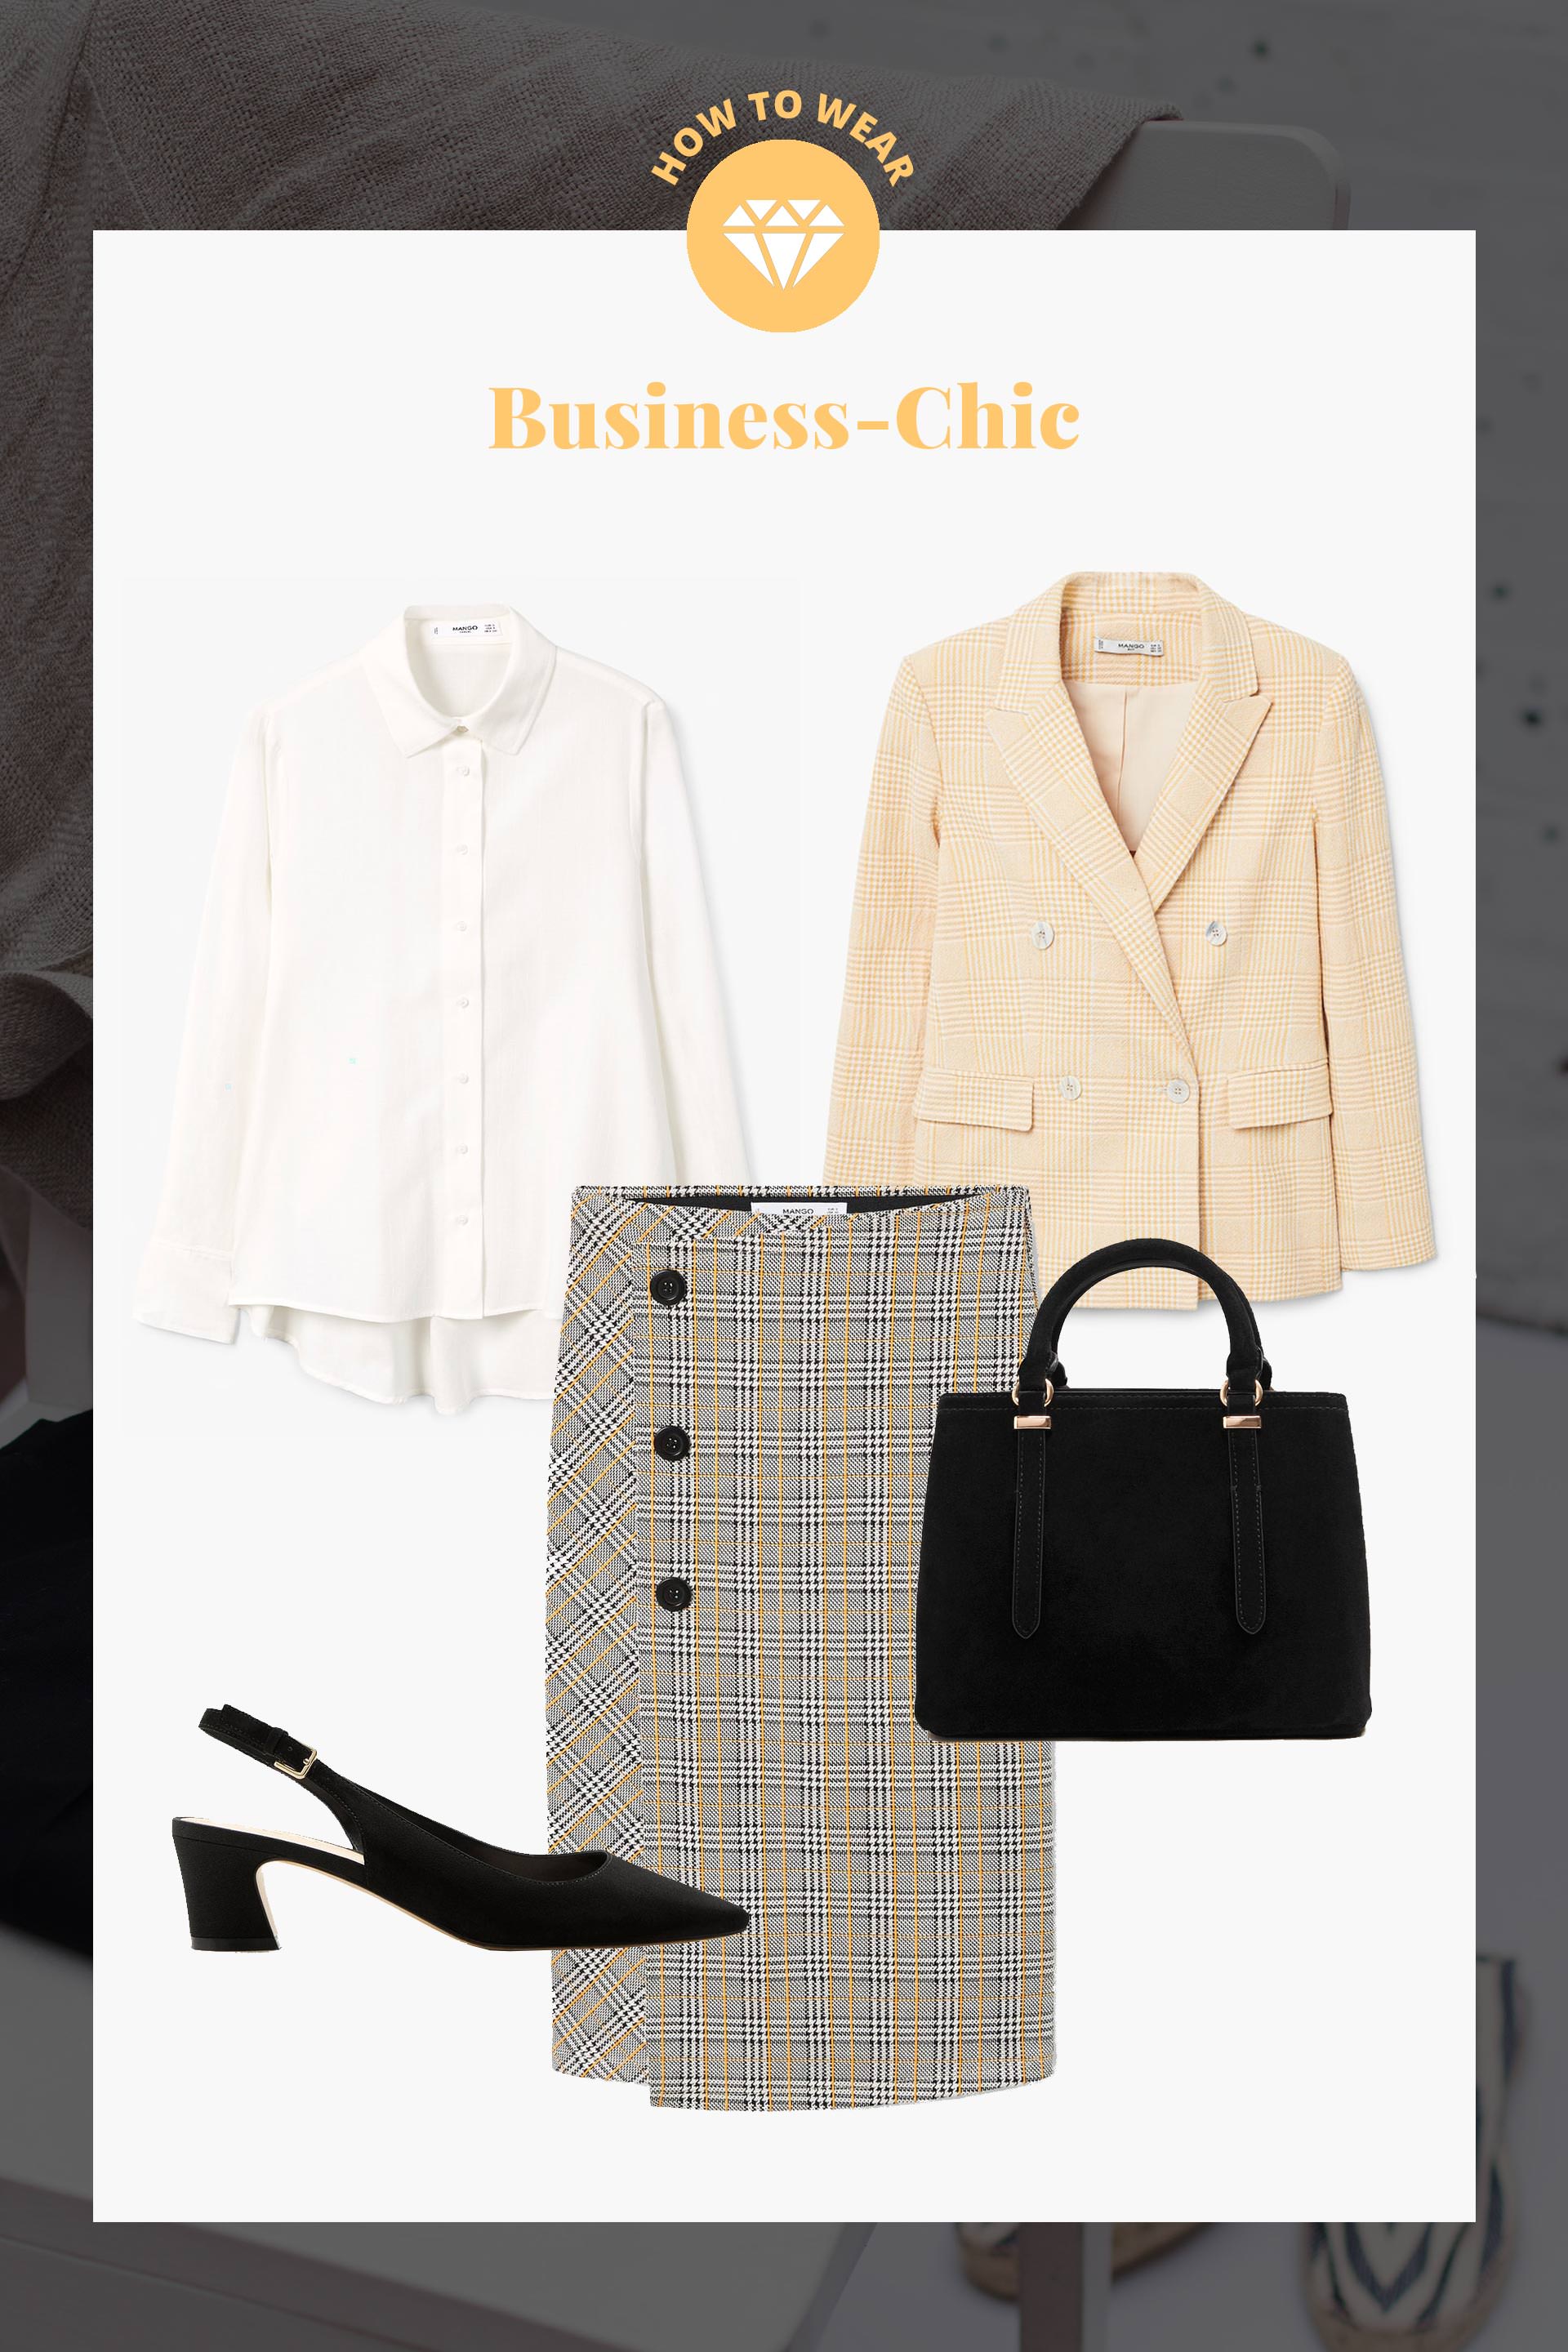 Business-Chic